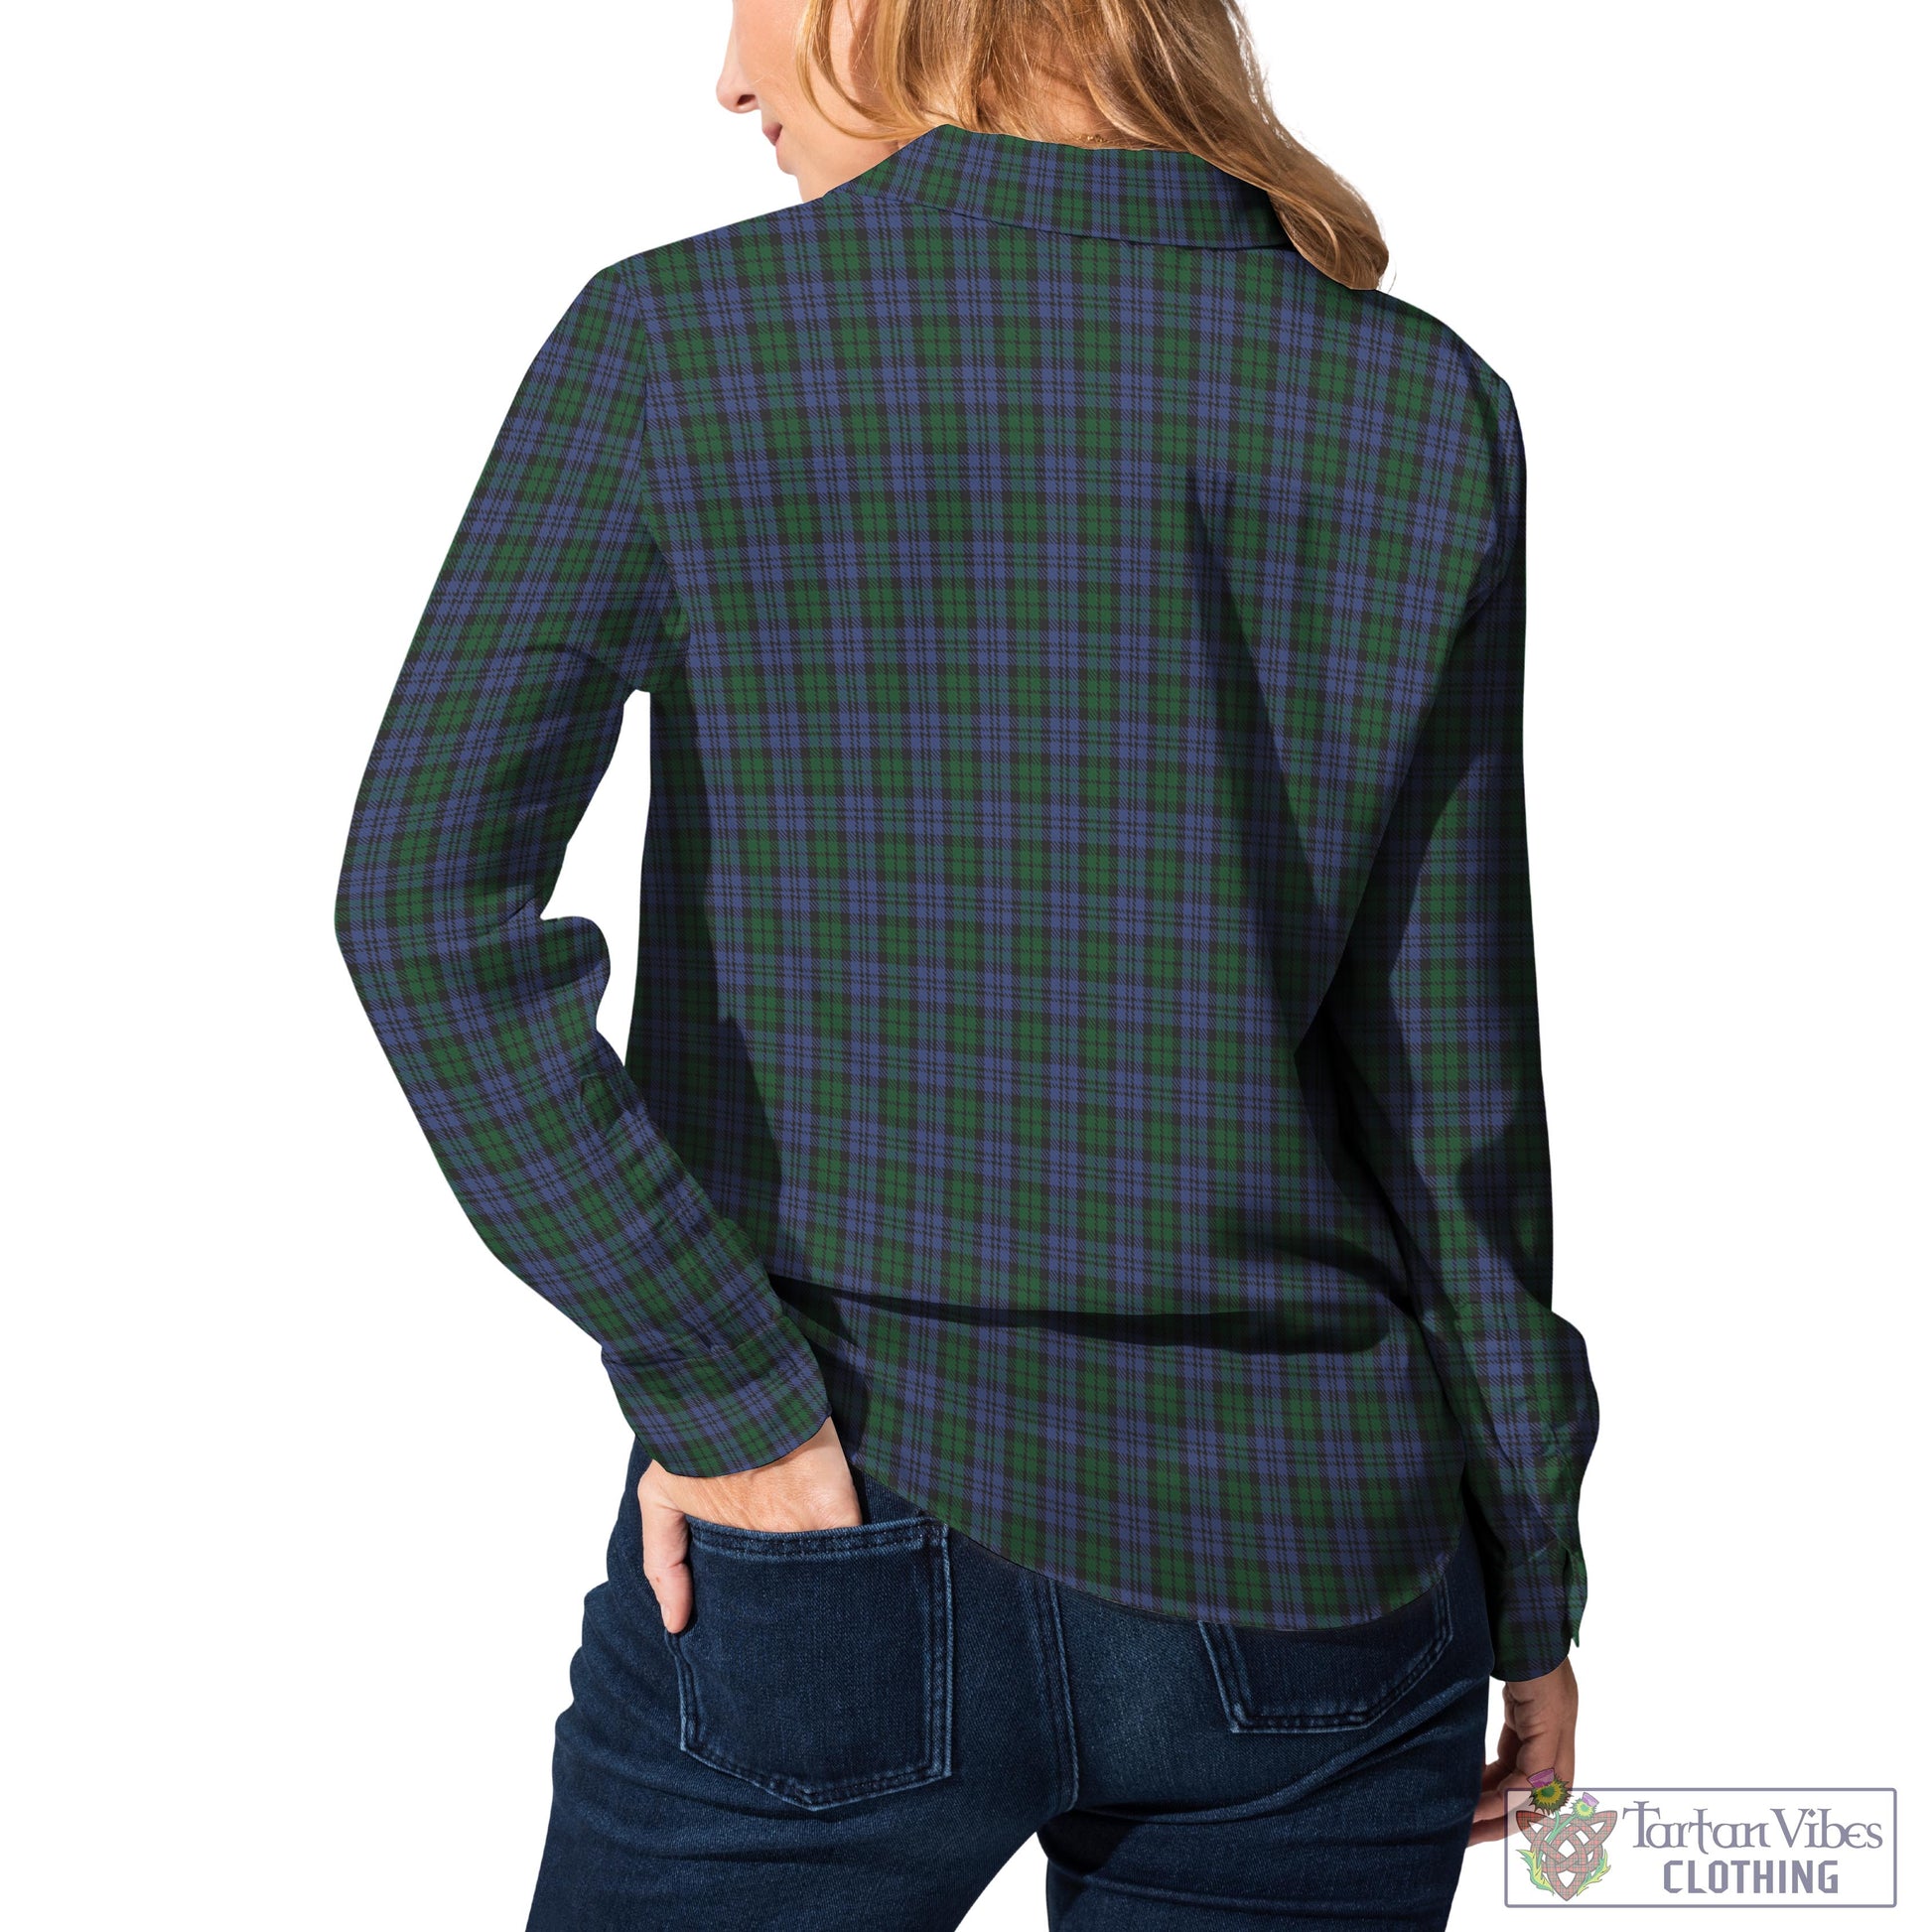 Tartan Vibes Clothing Sutherland Tartan Womens Casual Shirt with Family Crest